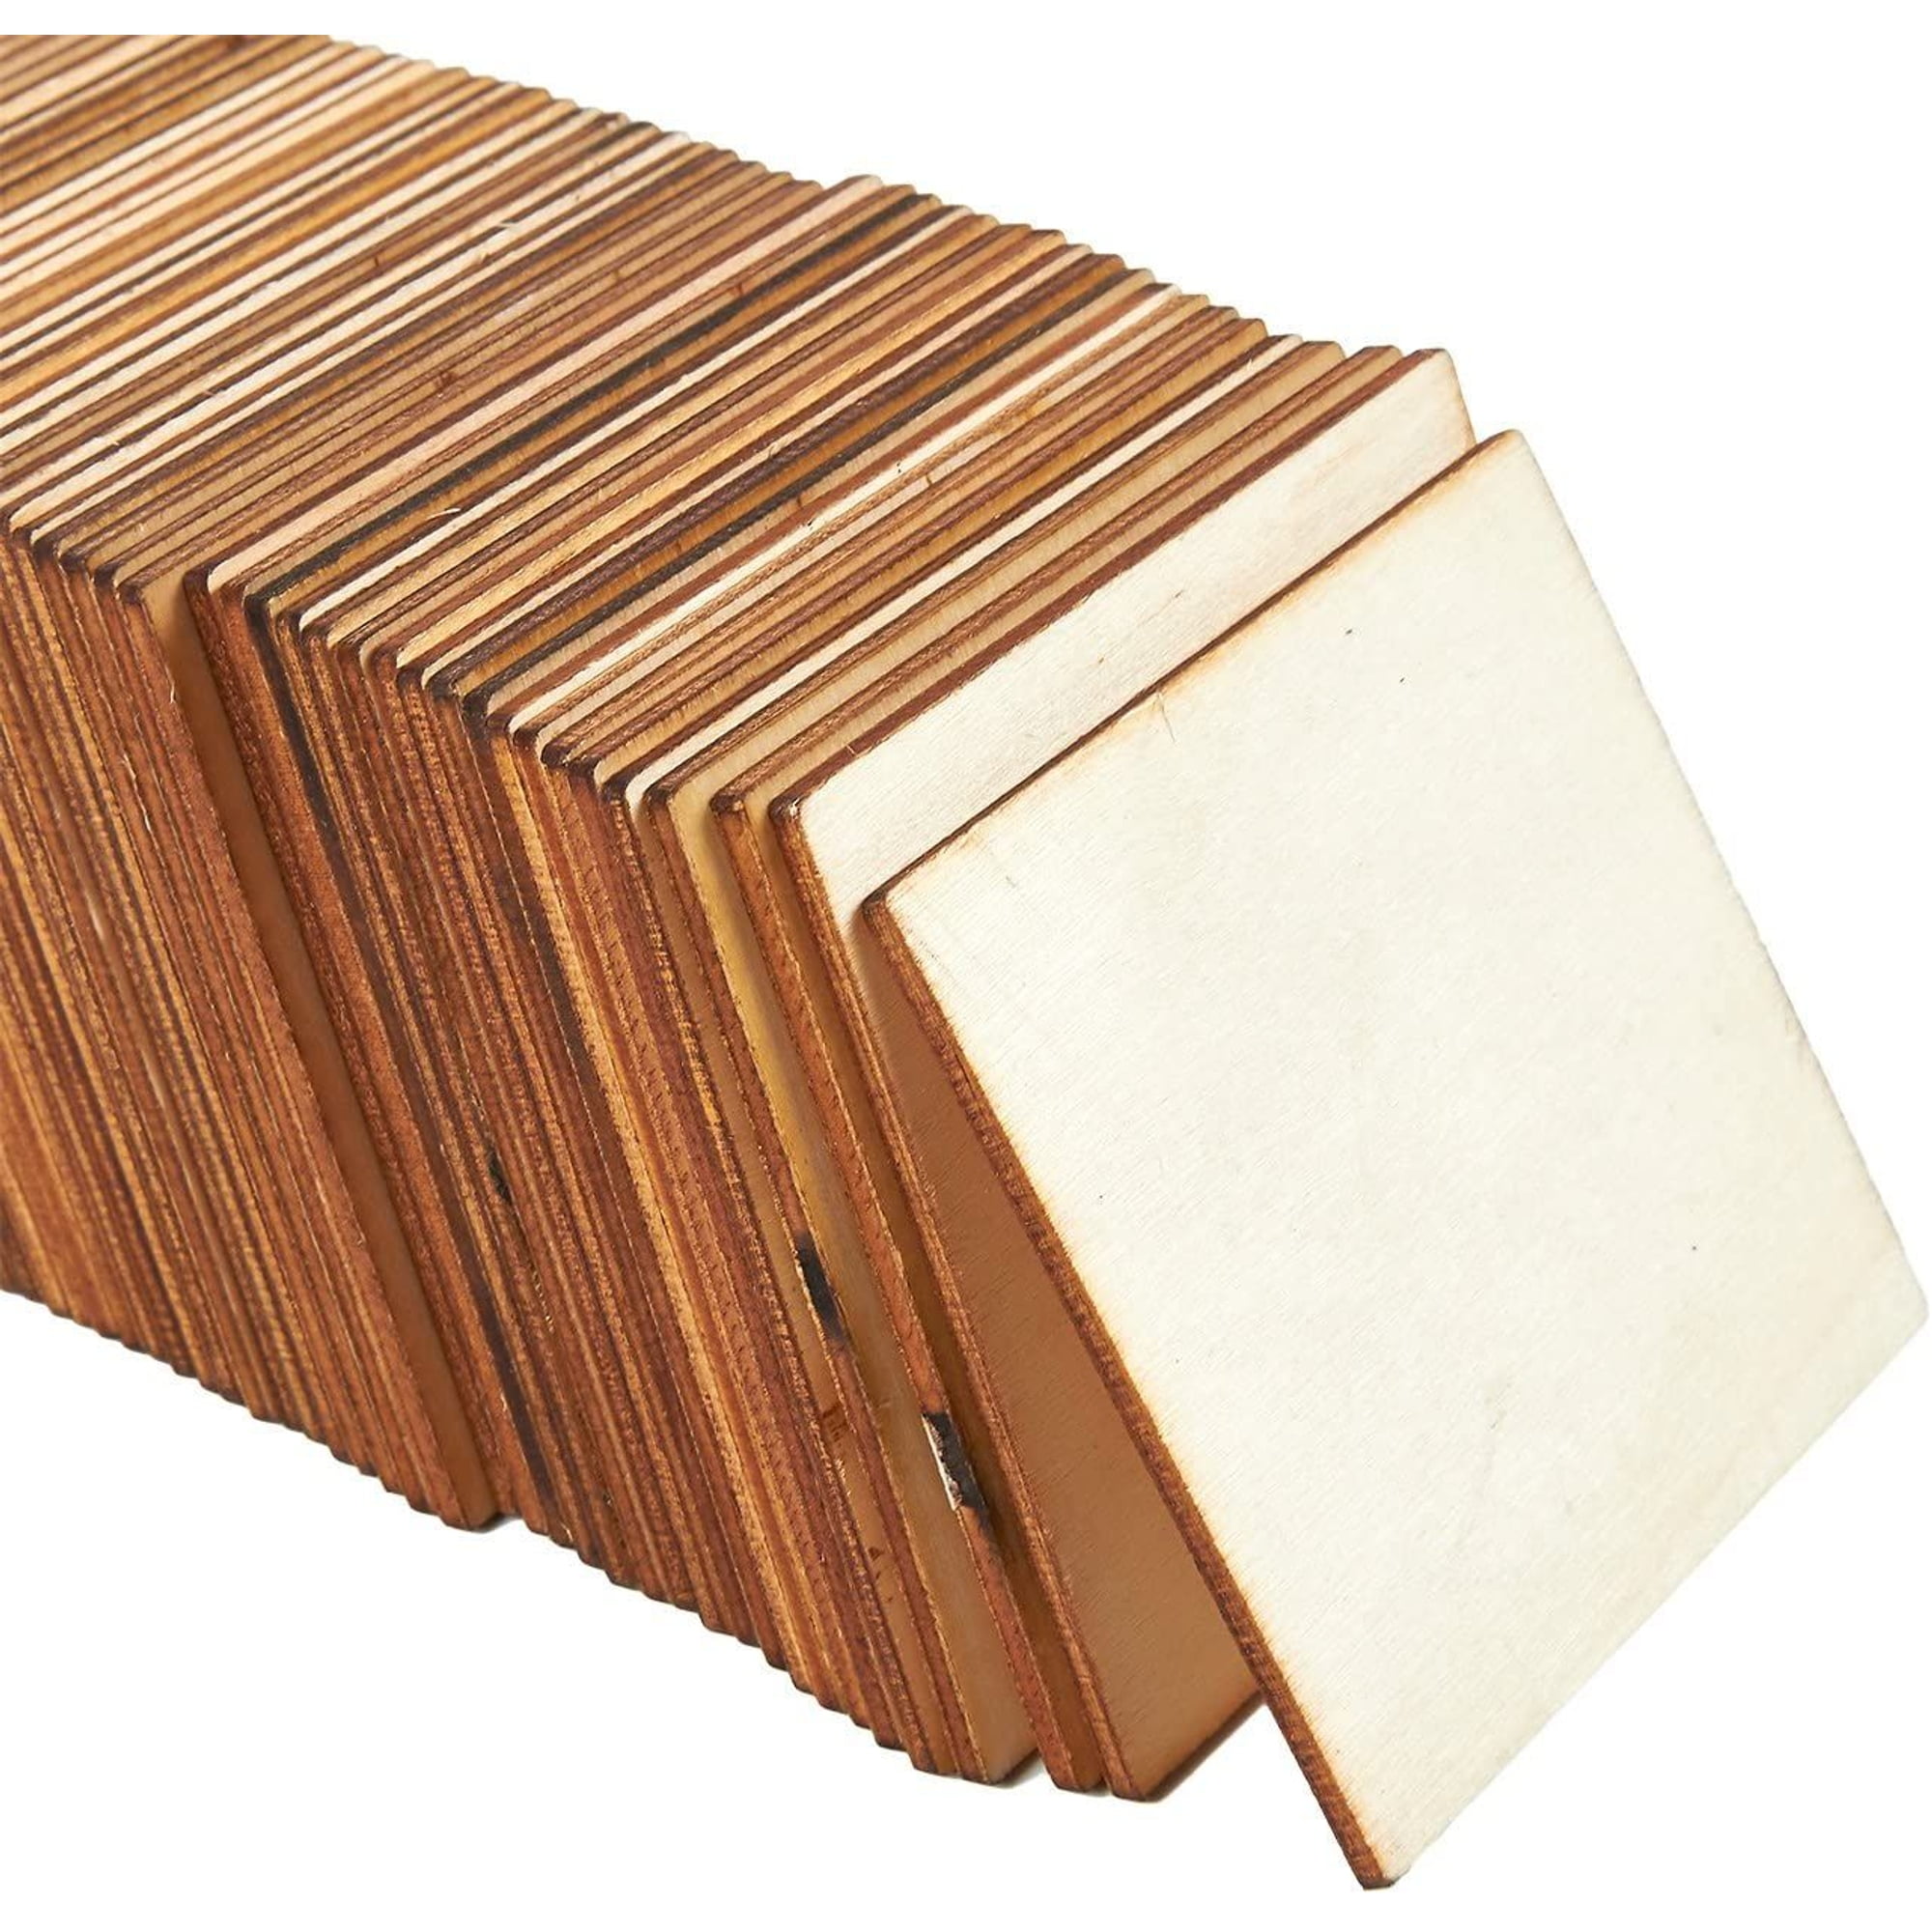 1 1/2 Wood Square Set of 10 Wood Tiles Unfinished Wood Wooden Squares 1/8  Thick 